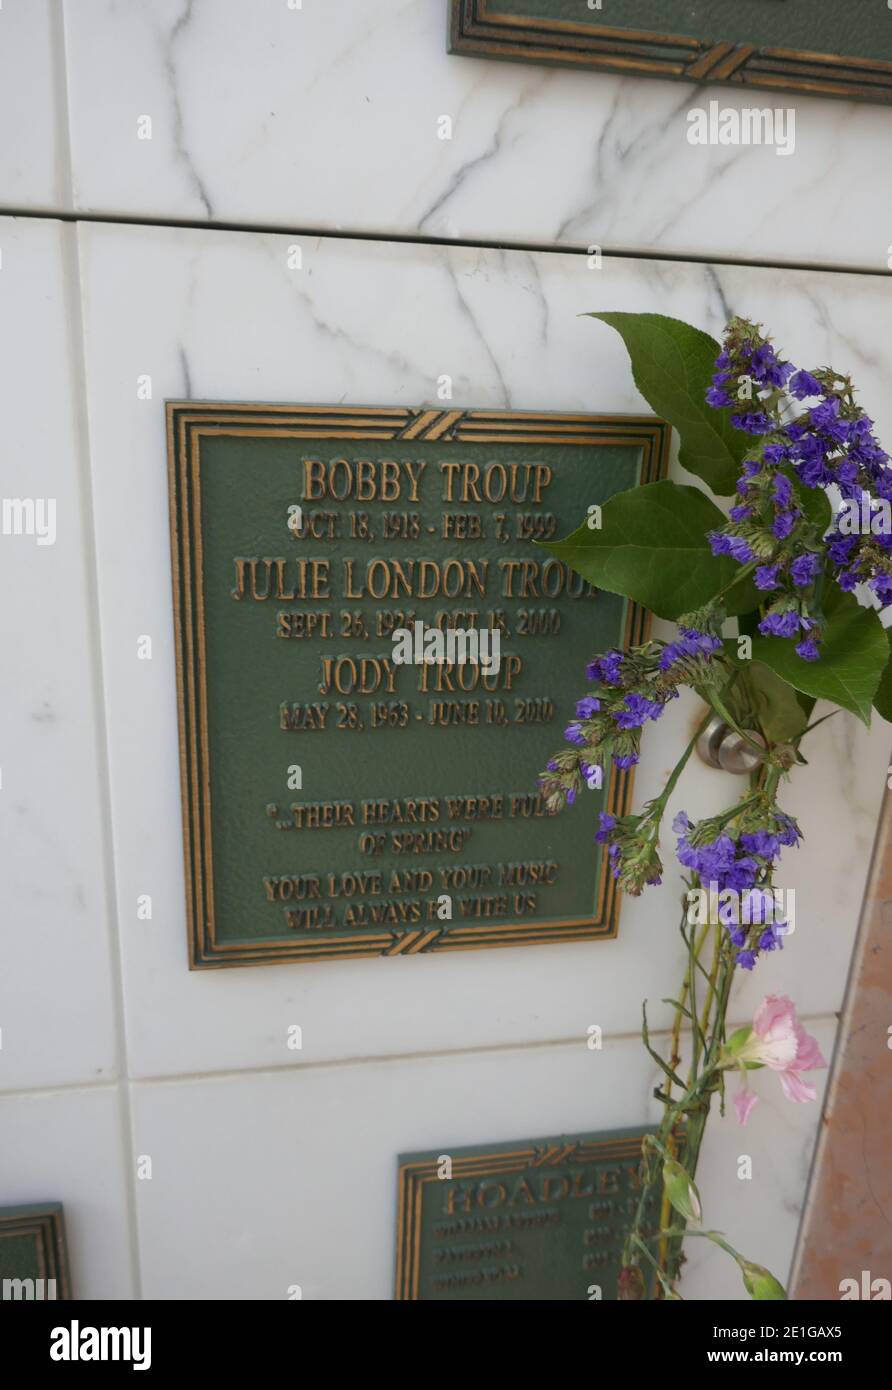 Los Angeles, California, USA 29th December 2020 A general view of atmosphere of actor Bobby Troup's Grave and singer Julie London's grave at Forest Lawn Hollywood Hills Memorial Park on December 29, 2020 in Los Angeles, California, USA. Photo by Barry King/Alamy Stock Photo Stock Photo